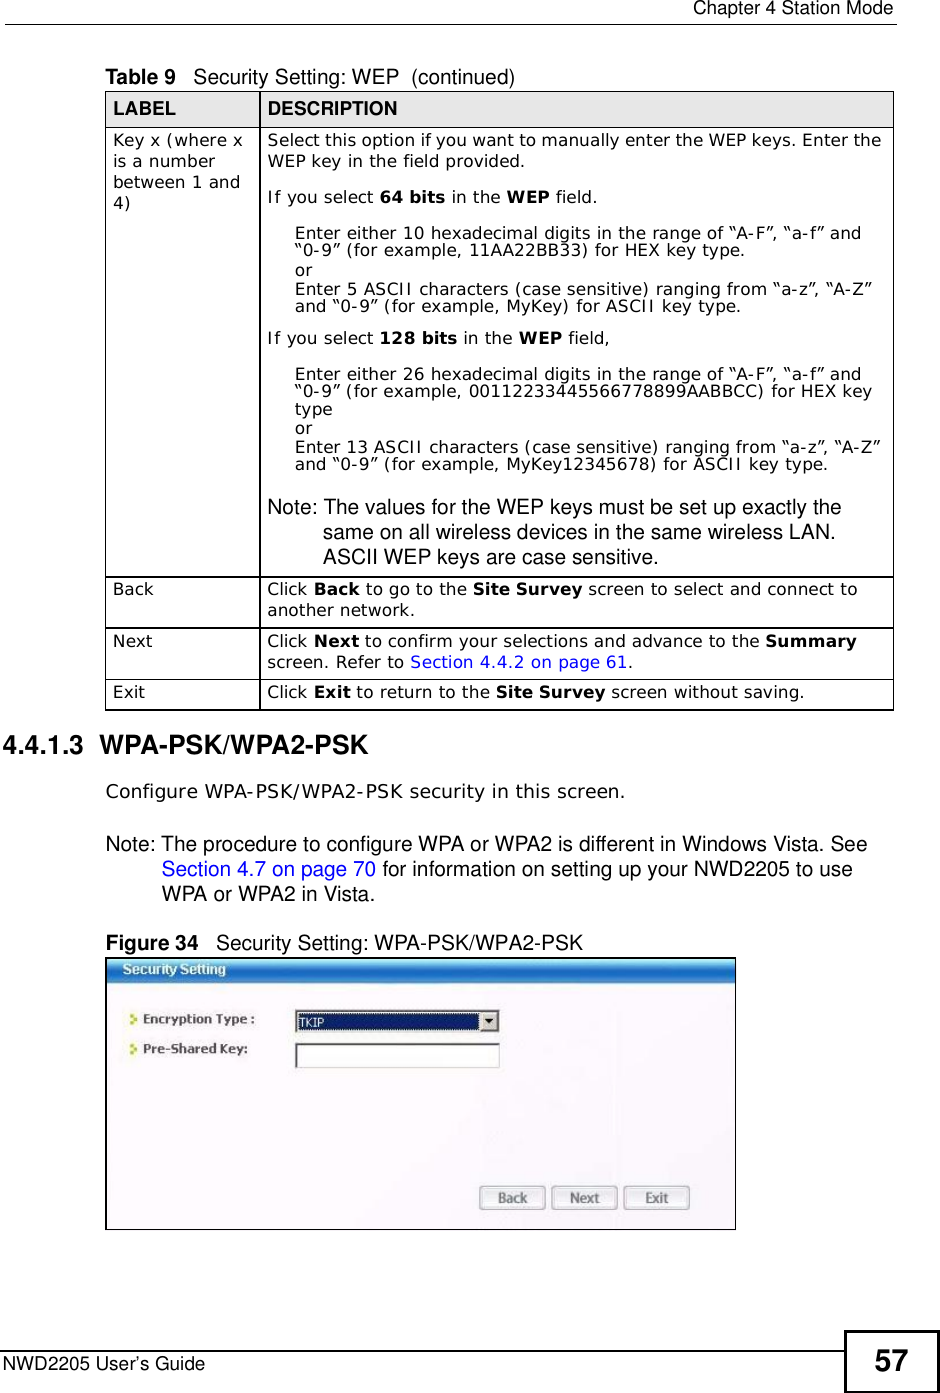  Chapter 4Station ModeNWD2205 User’s Guide 574.4.1.3  WPA-PSK/WPA2-PSKConfigure WPA-PSK/WPA2-PSK security in this screen.Note: The procedure to configure WPA or WPA2 is different in Windows Vista. See Section 4.7 on page 70 for information on setting up your NWD2205 to use WPA or WPA2 in Vista.Figure 34   Security Setting: WPA-PSK/WPA2-PSKKey x (where x is a number between 1 and 4)Select this option if you want to manually enter the WEP keys. Enter the WEP key in the field provided.If you select 64 bits in the WEP field.Enter either 10 hexadecimal digits in the range of “A-F”, “a-f” and “0-9” (for example, 11AA22BB33) for HEX key type.orEnter 5 ASCII characters (case sensitive) ranging from “a-z”, “A-Z” and “0-9” (for example, MyKey) for ASCII key type. If you select 128 bits in the WEP field,Enter either 26 hexadecimal digits in the range of “A-F”, “a-f” and “0-9” (for example, 00112233445566778899AABBCC) for HEX key typeorEnter 13 ASCII characters (case sensitive) ranging from “a-z”, “A-Z” and “0-9” (for example, MyKey12345678) for ASCII key type.Note: The values for the WEP keys must be set up exactly the same on all wireless devices in the same wireless LAN. ASCII WEP keys are case sensitive.BackClick Back to go to the Site Survey screen to select and connect to another network.NextClick Next to confirm your selections and advance to the Summary screen. Refer to Section 4.4.2 on page 61.ExitClick Exit to return to the Site Survey screen without saving.Table 9   Security Setting: WEP  (continued)LABEL DESCRIPTION